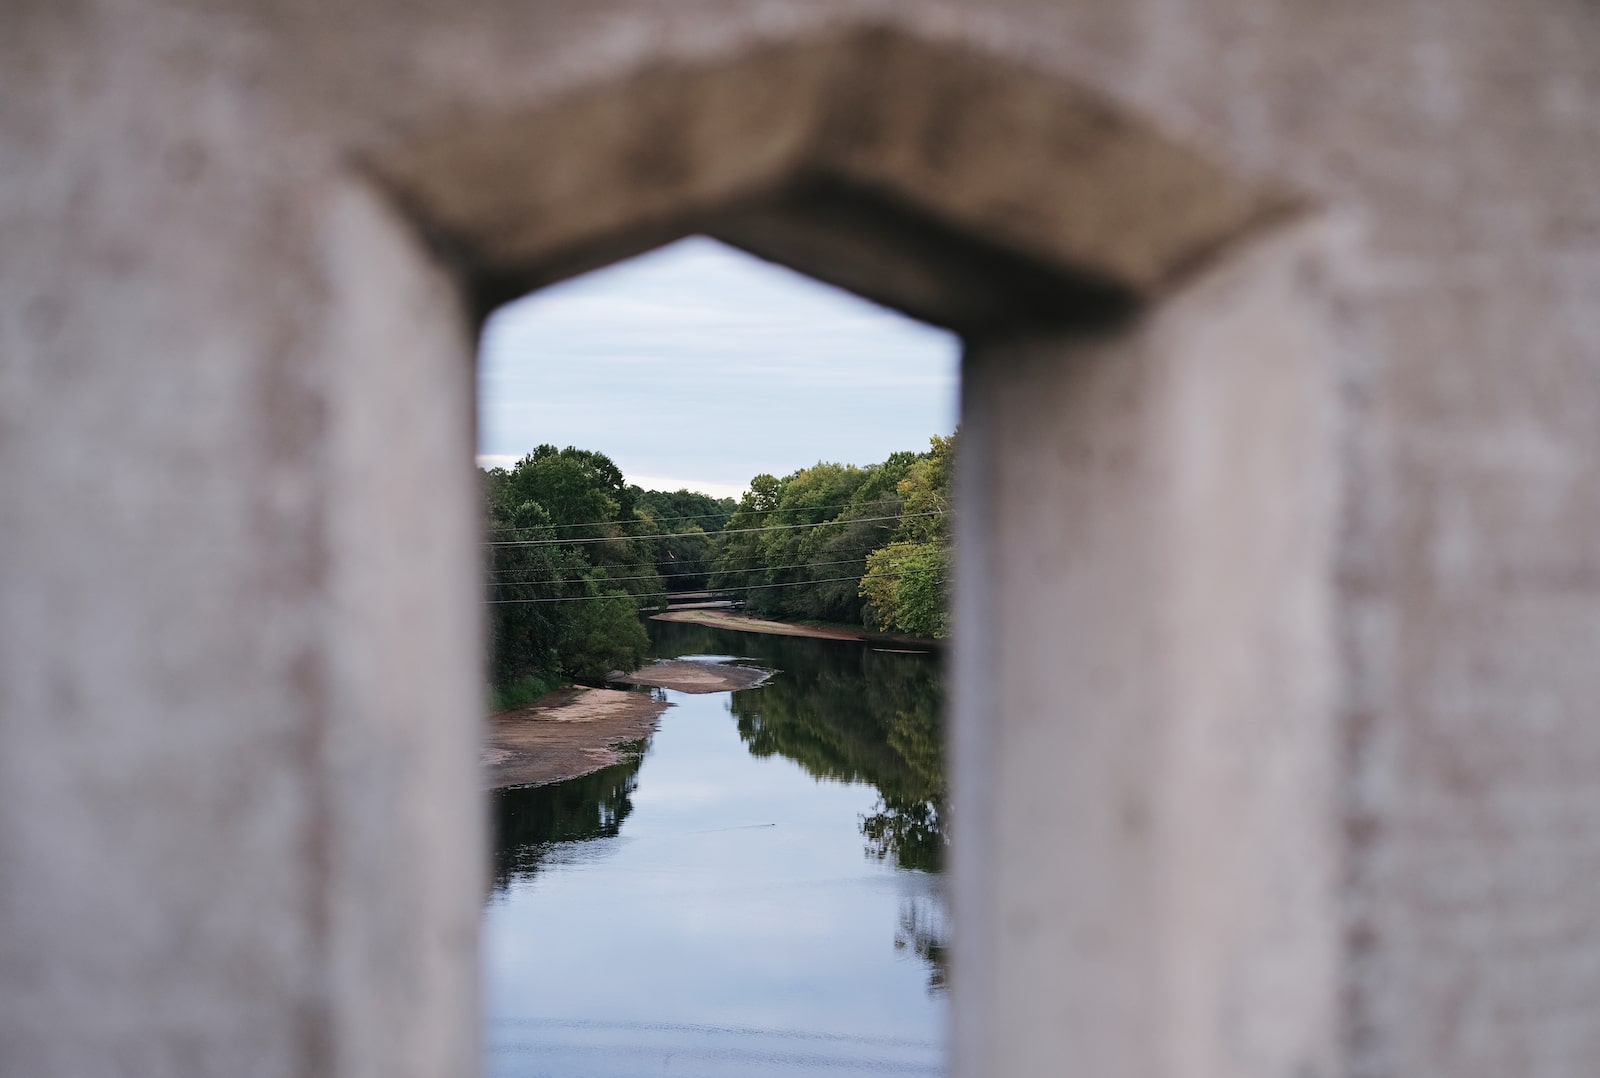 A stone window through which you can see water